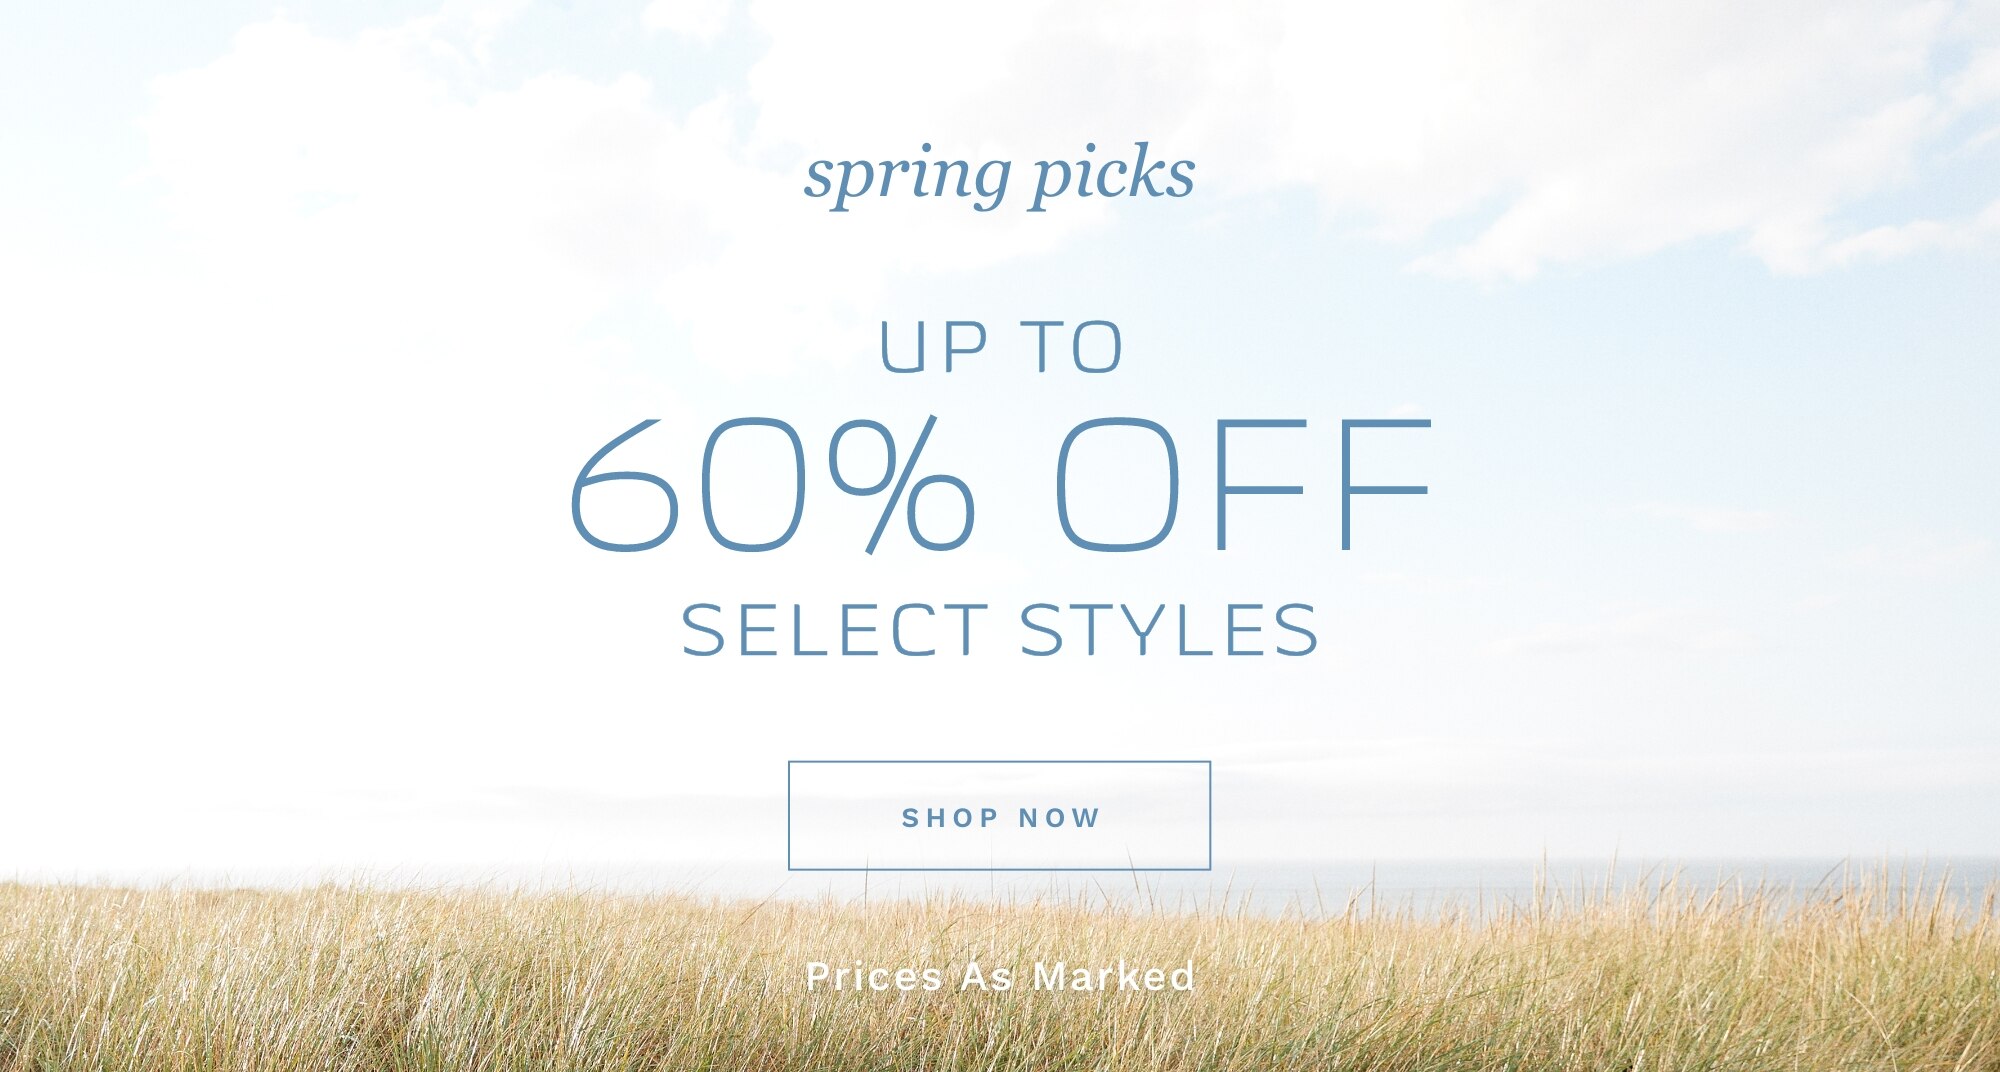 spring picks UP TO 70% OFF SELECT STYLES SHOP NOW Prices as Marked